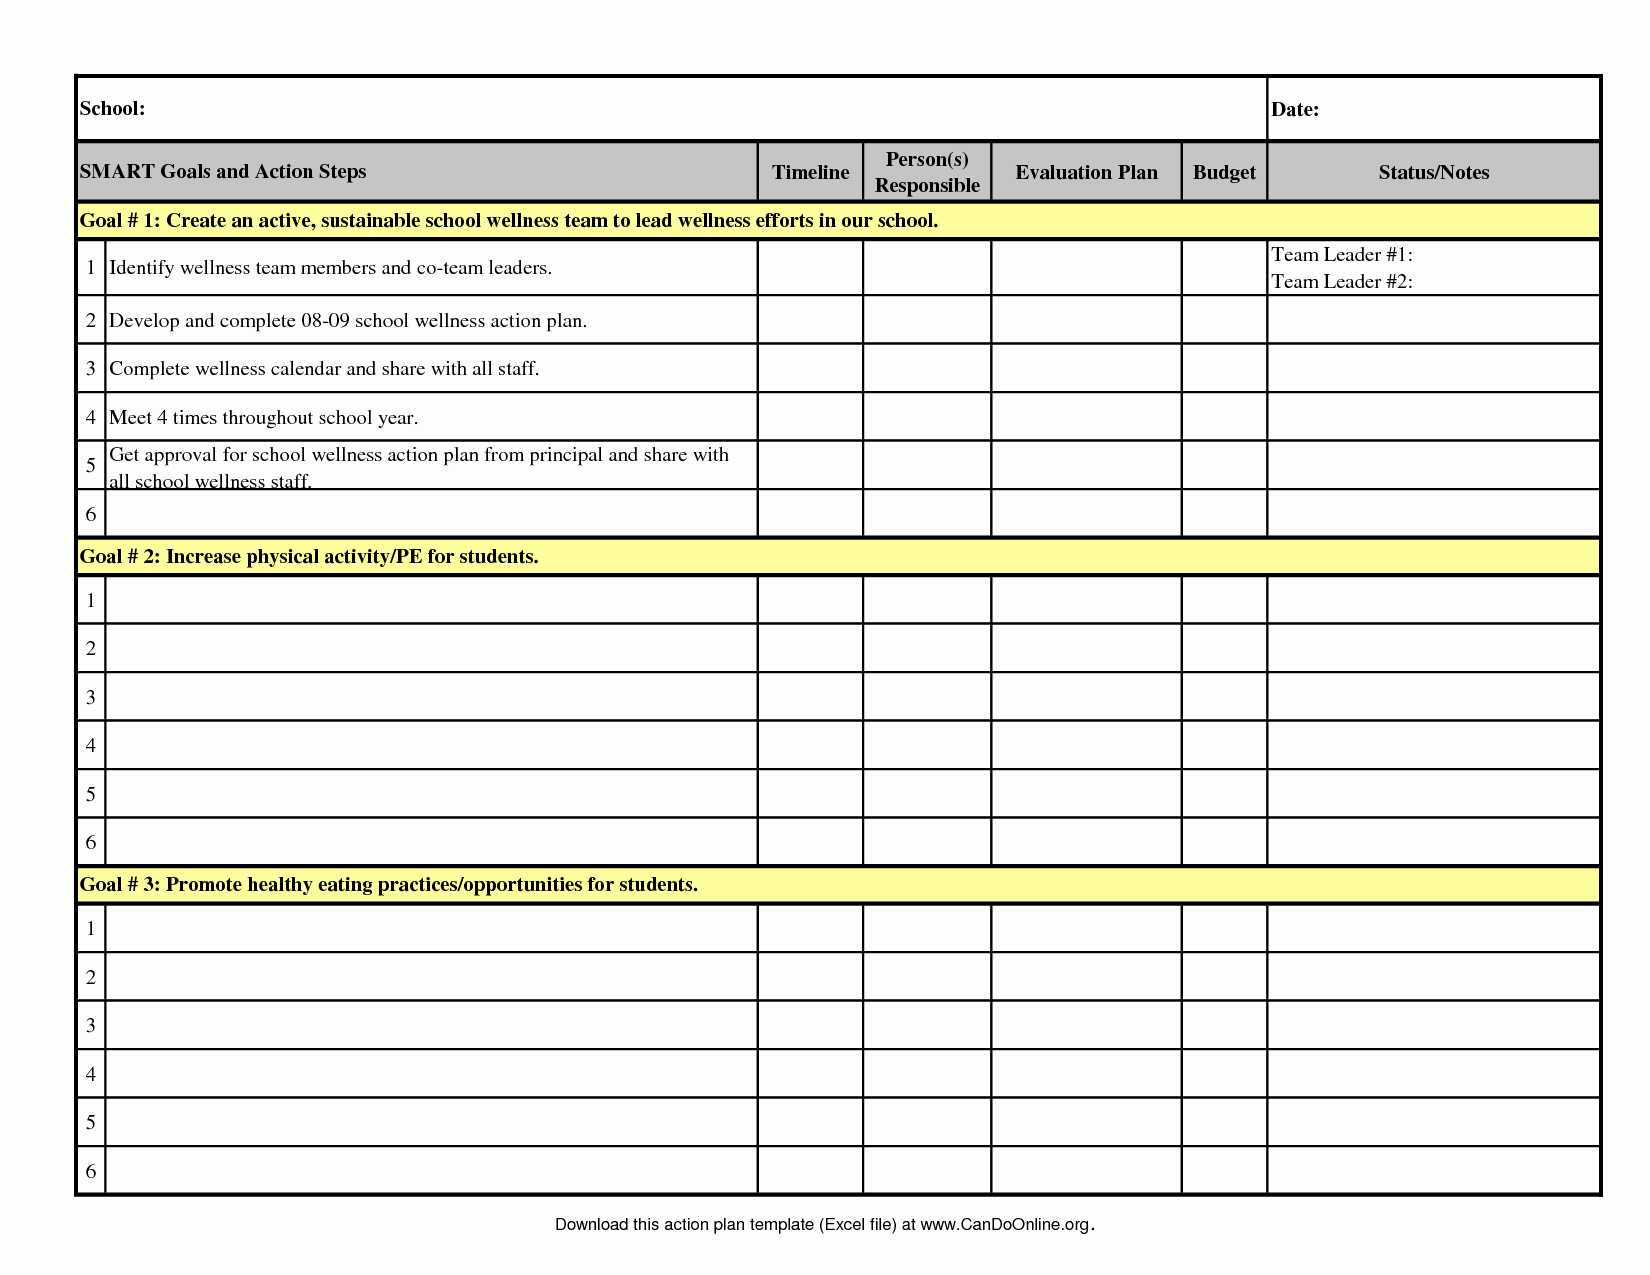 Customer Service Activity Worksheet as Well as Simple Spreadsheet Program for How are Spreadsheets Used In Business